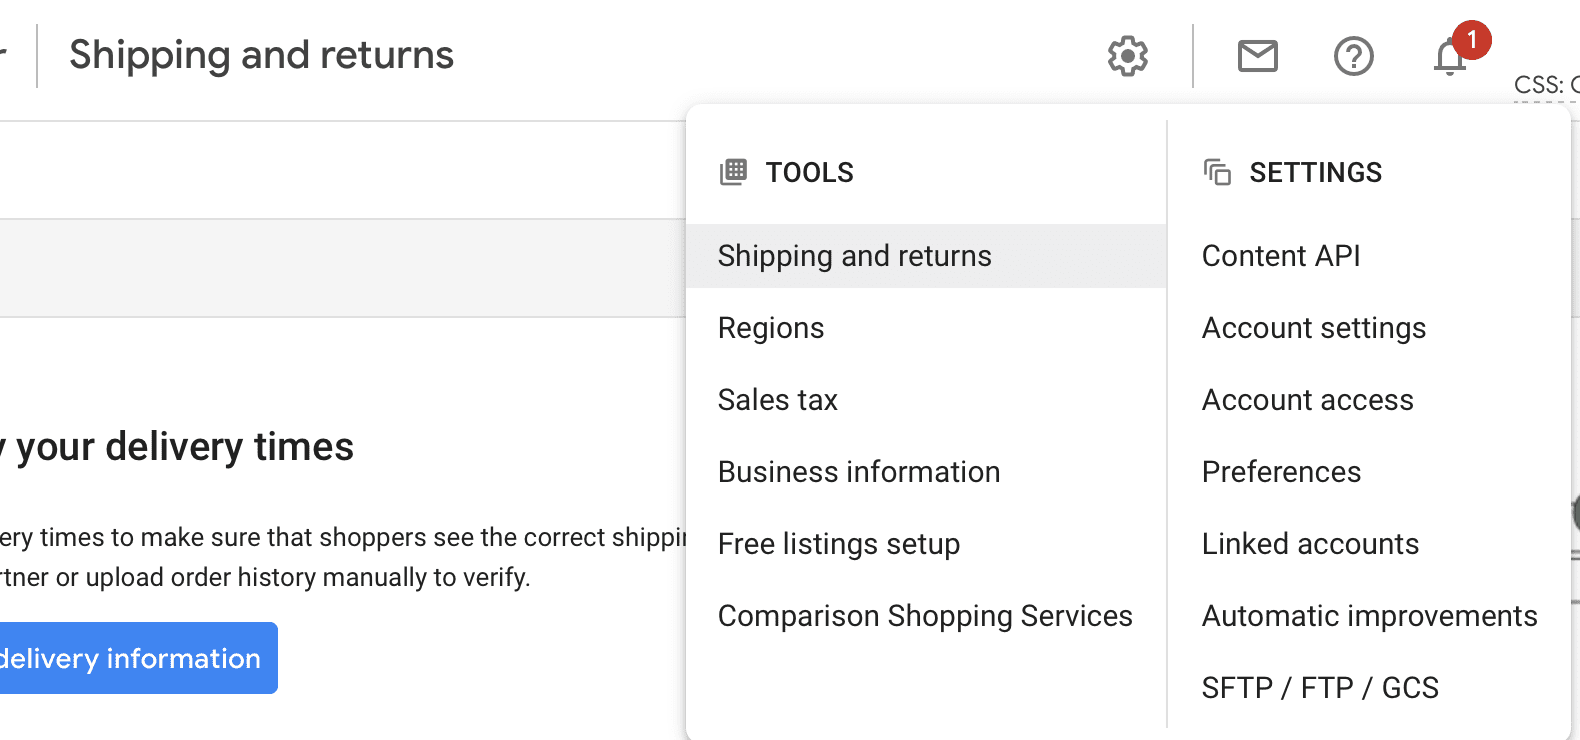 Google Merchant Center Web Page on Shipping and Returns